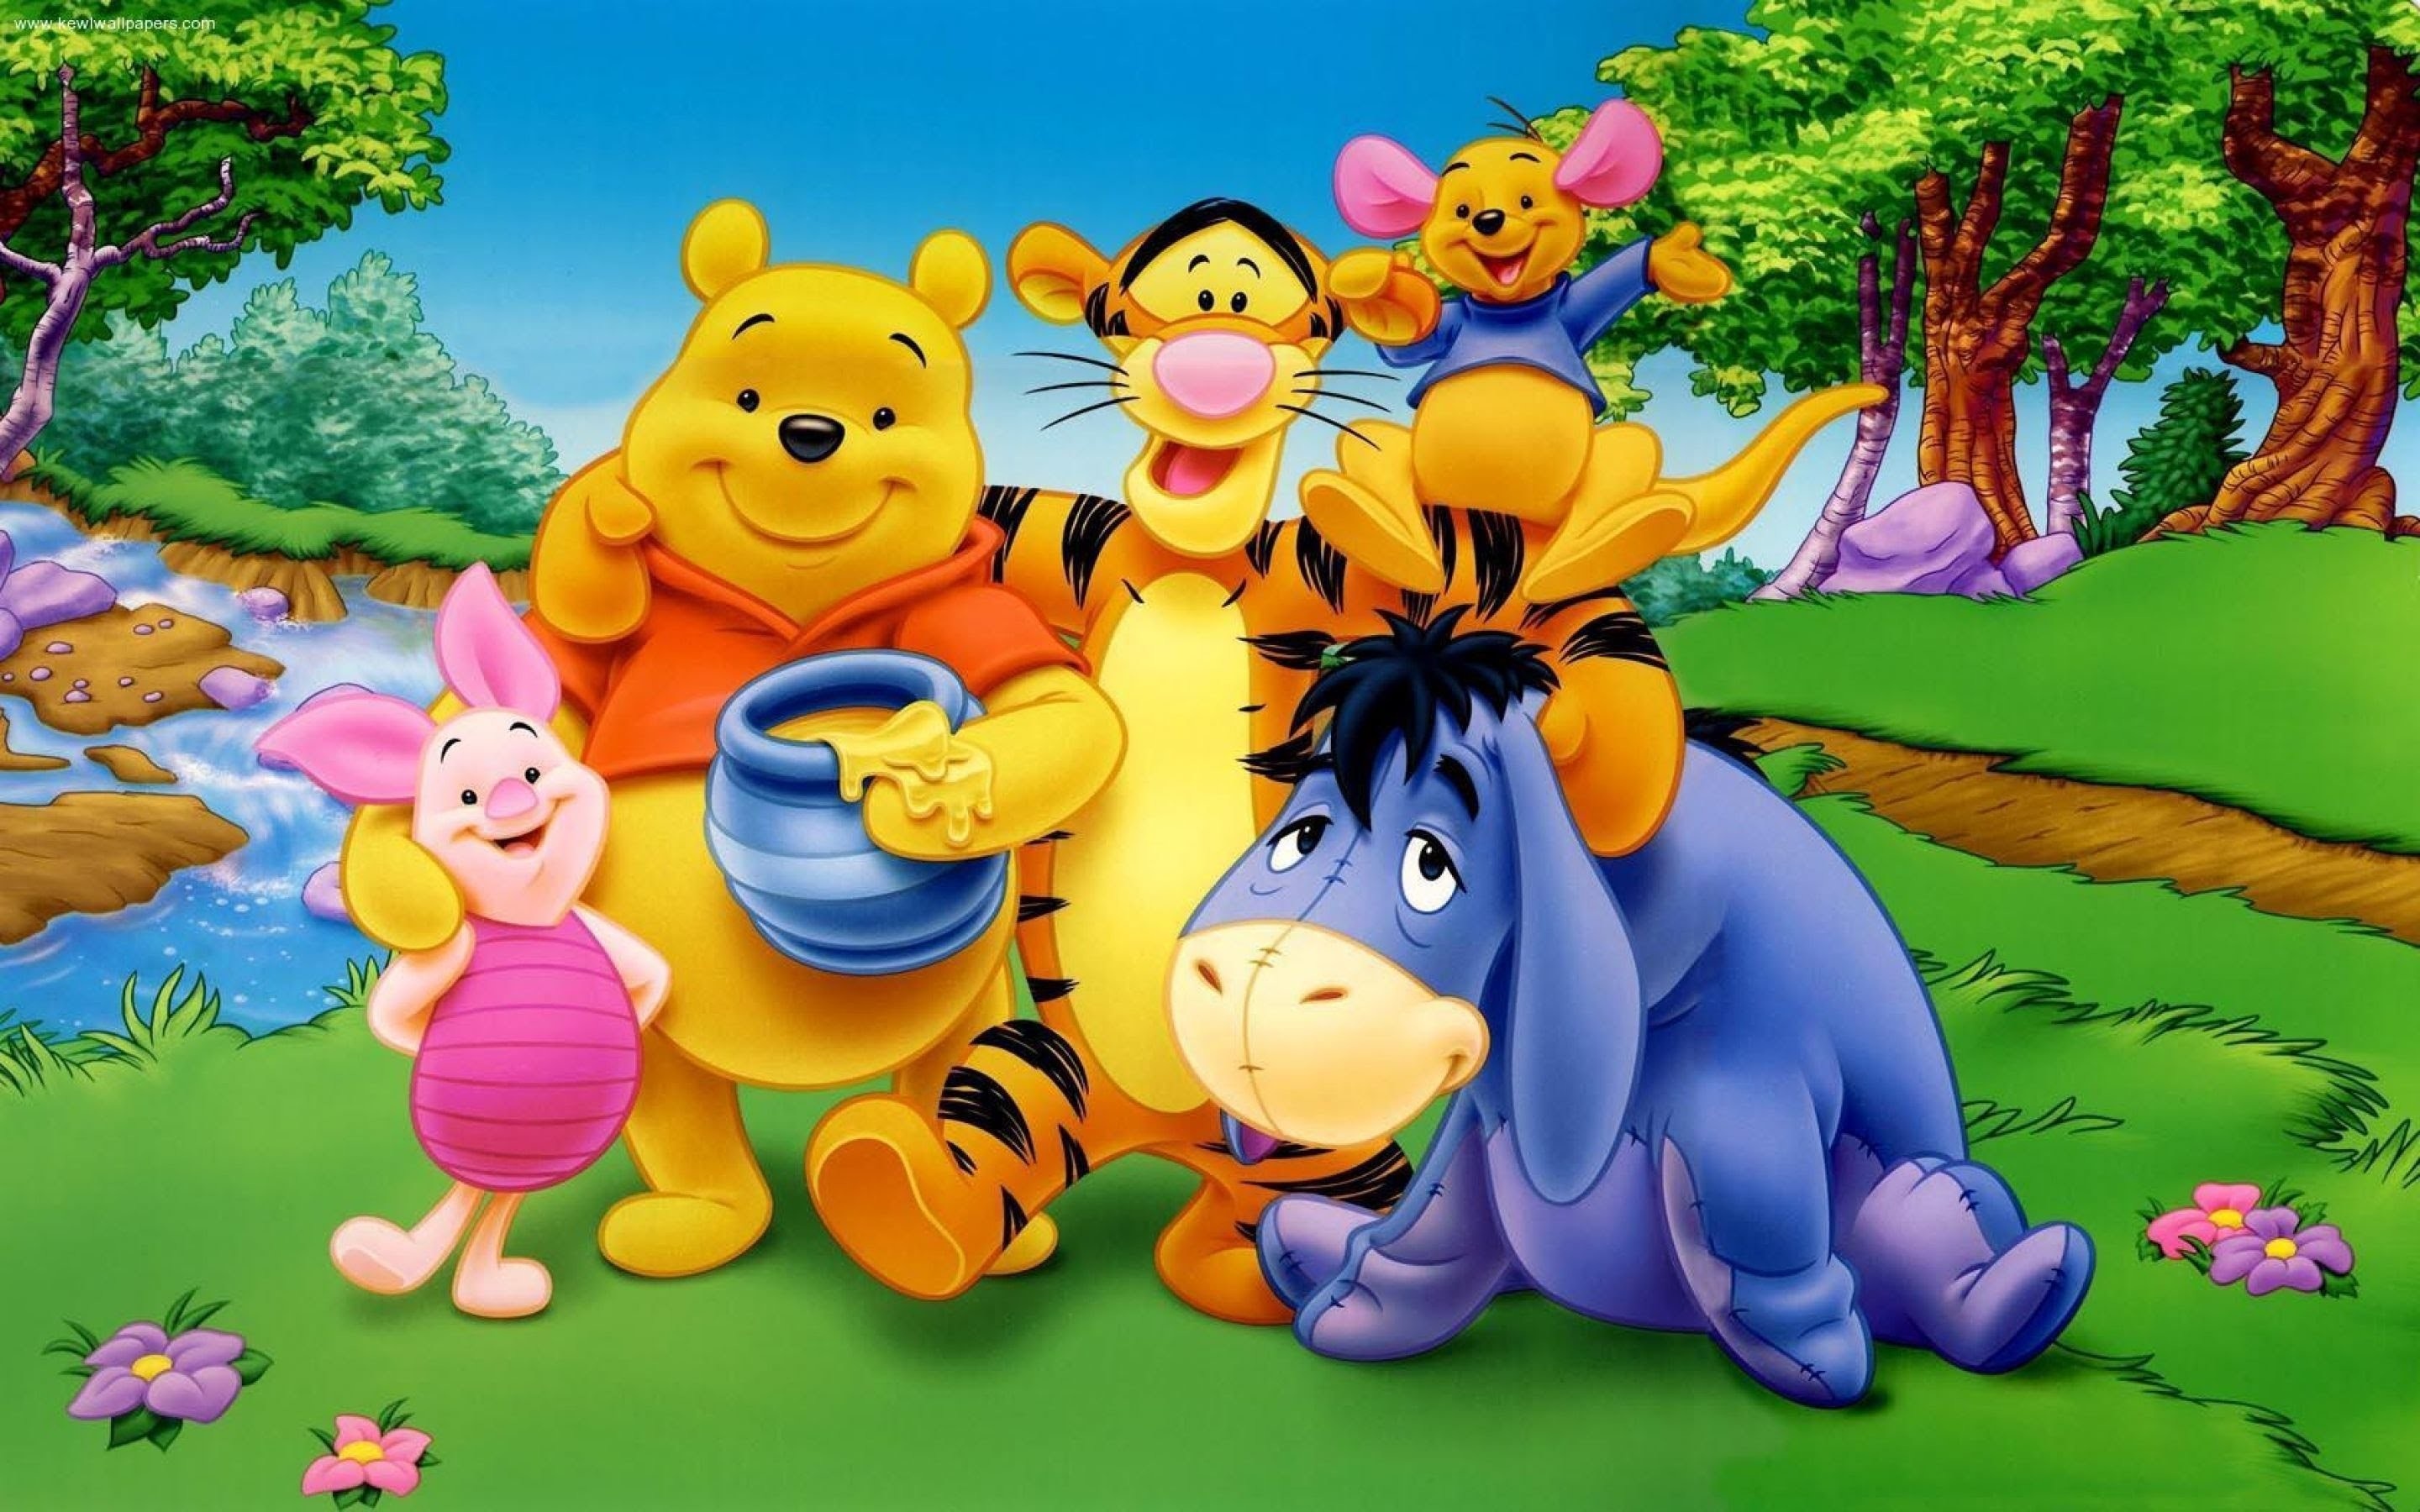 Baby Roo, Winnie-the-Pooh animation, Pooh Bear wallpaper, Pictures, 2880x1800 HD Desktop